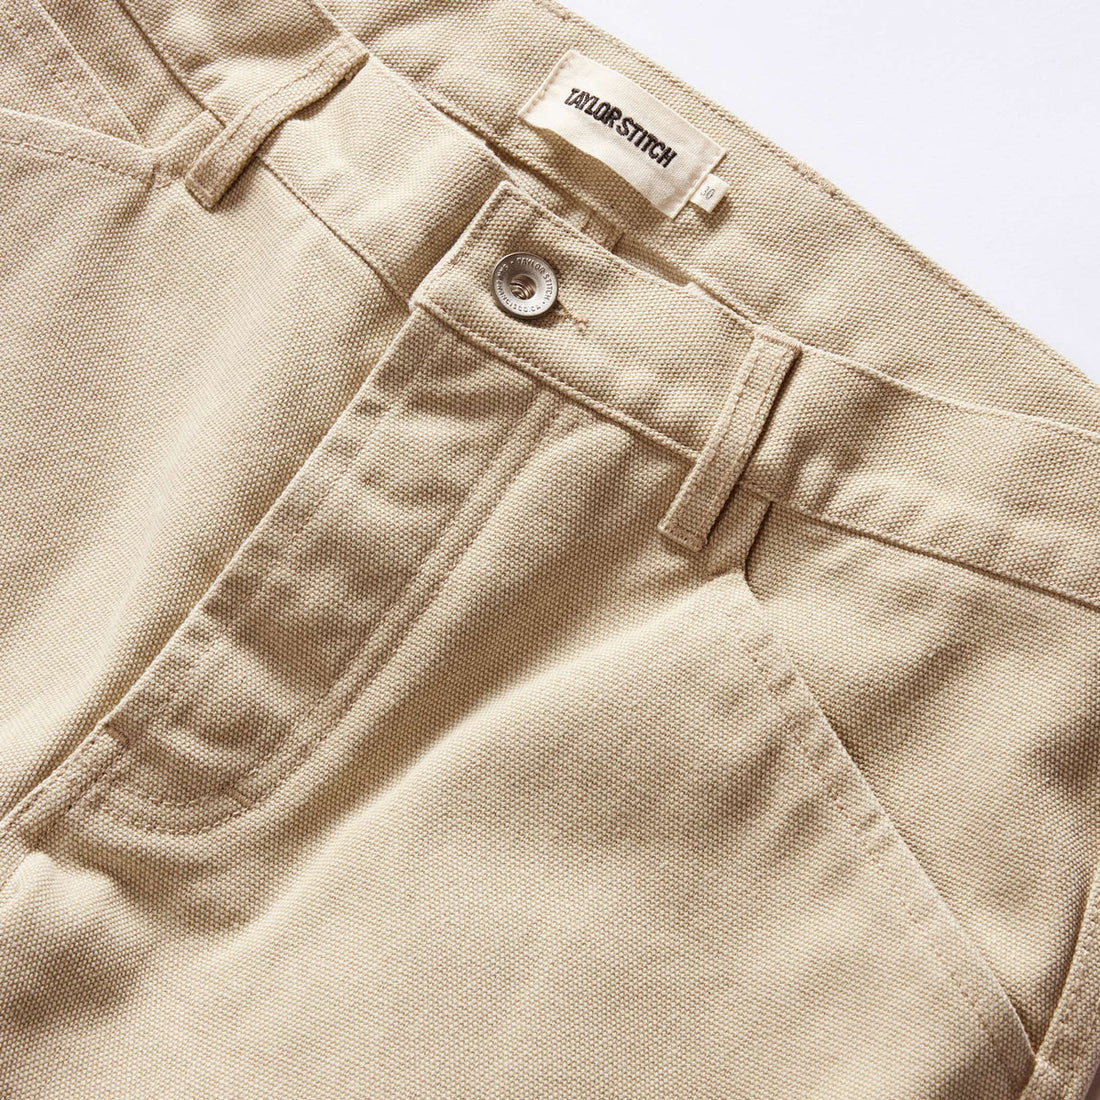 Taylor Stitch - The Camp Pant in Rinsed Light Khaki Chipped Canvas